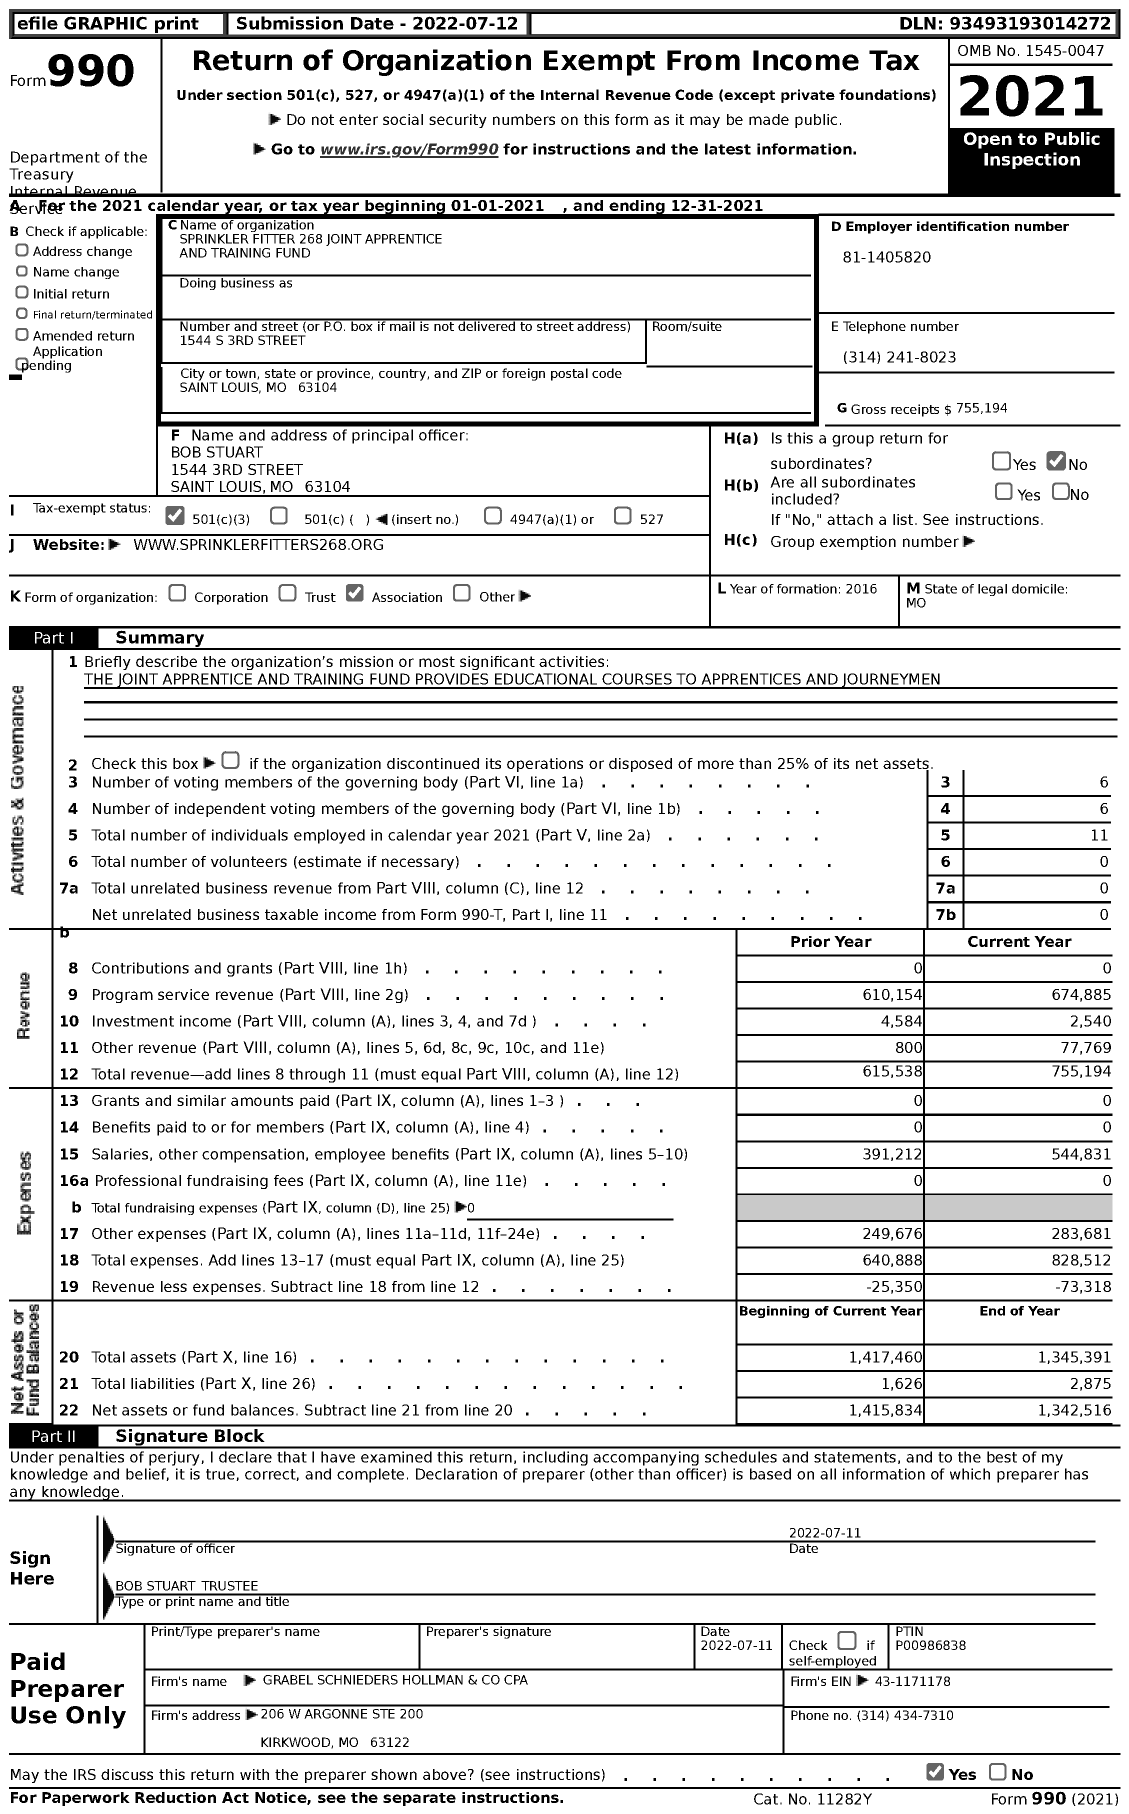 Image of first page of 2021 Form 990 for Sprinkler Fitter 268 Joint Apprentice and Training Fund